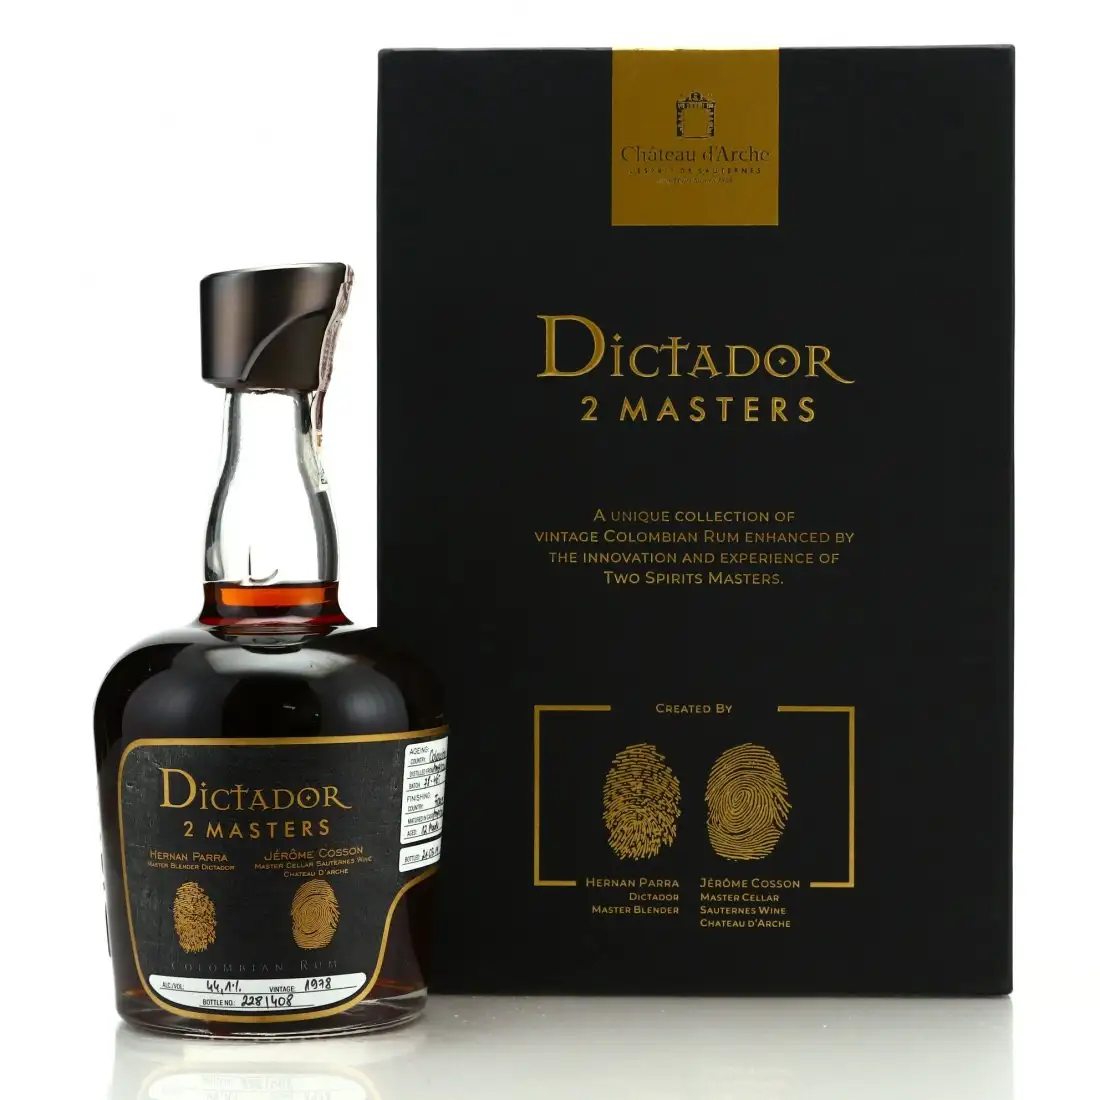 Image of the front of the bottle of the rum Dictador 2 Masters Chateau d'Arche